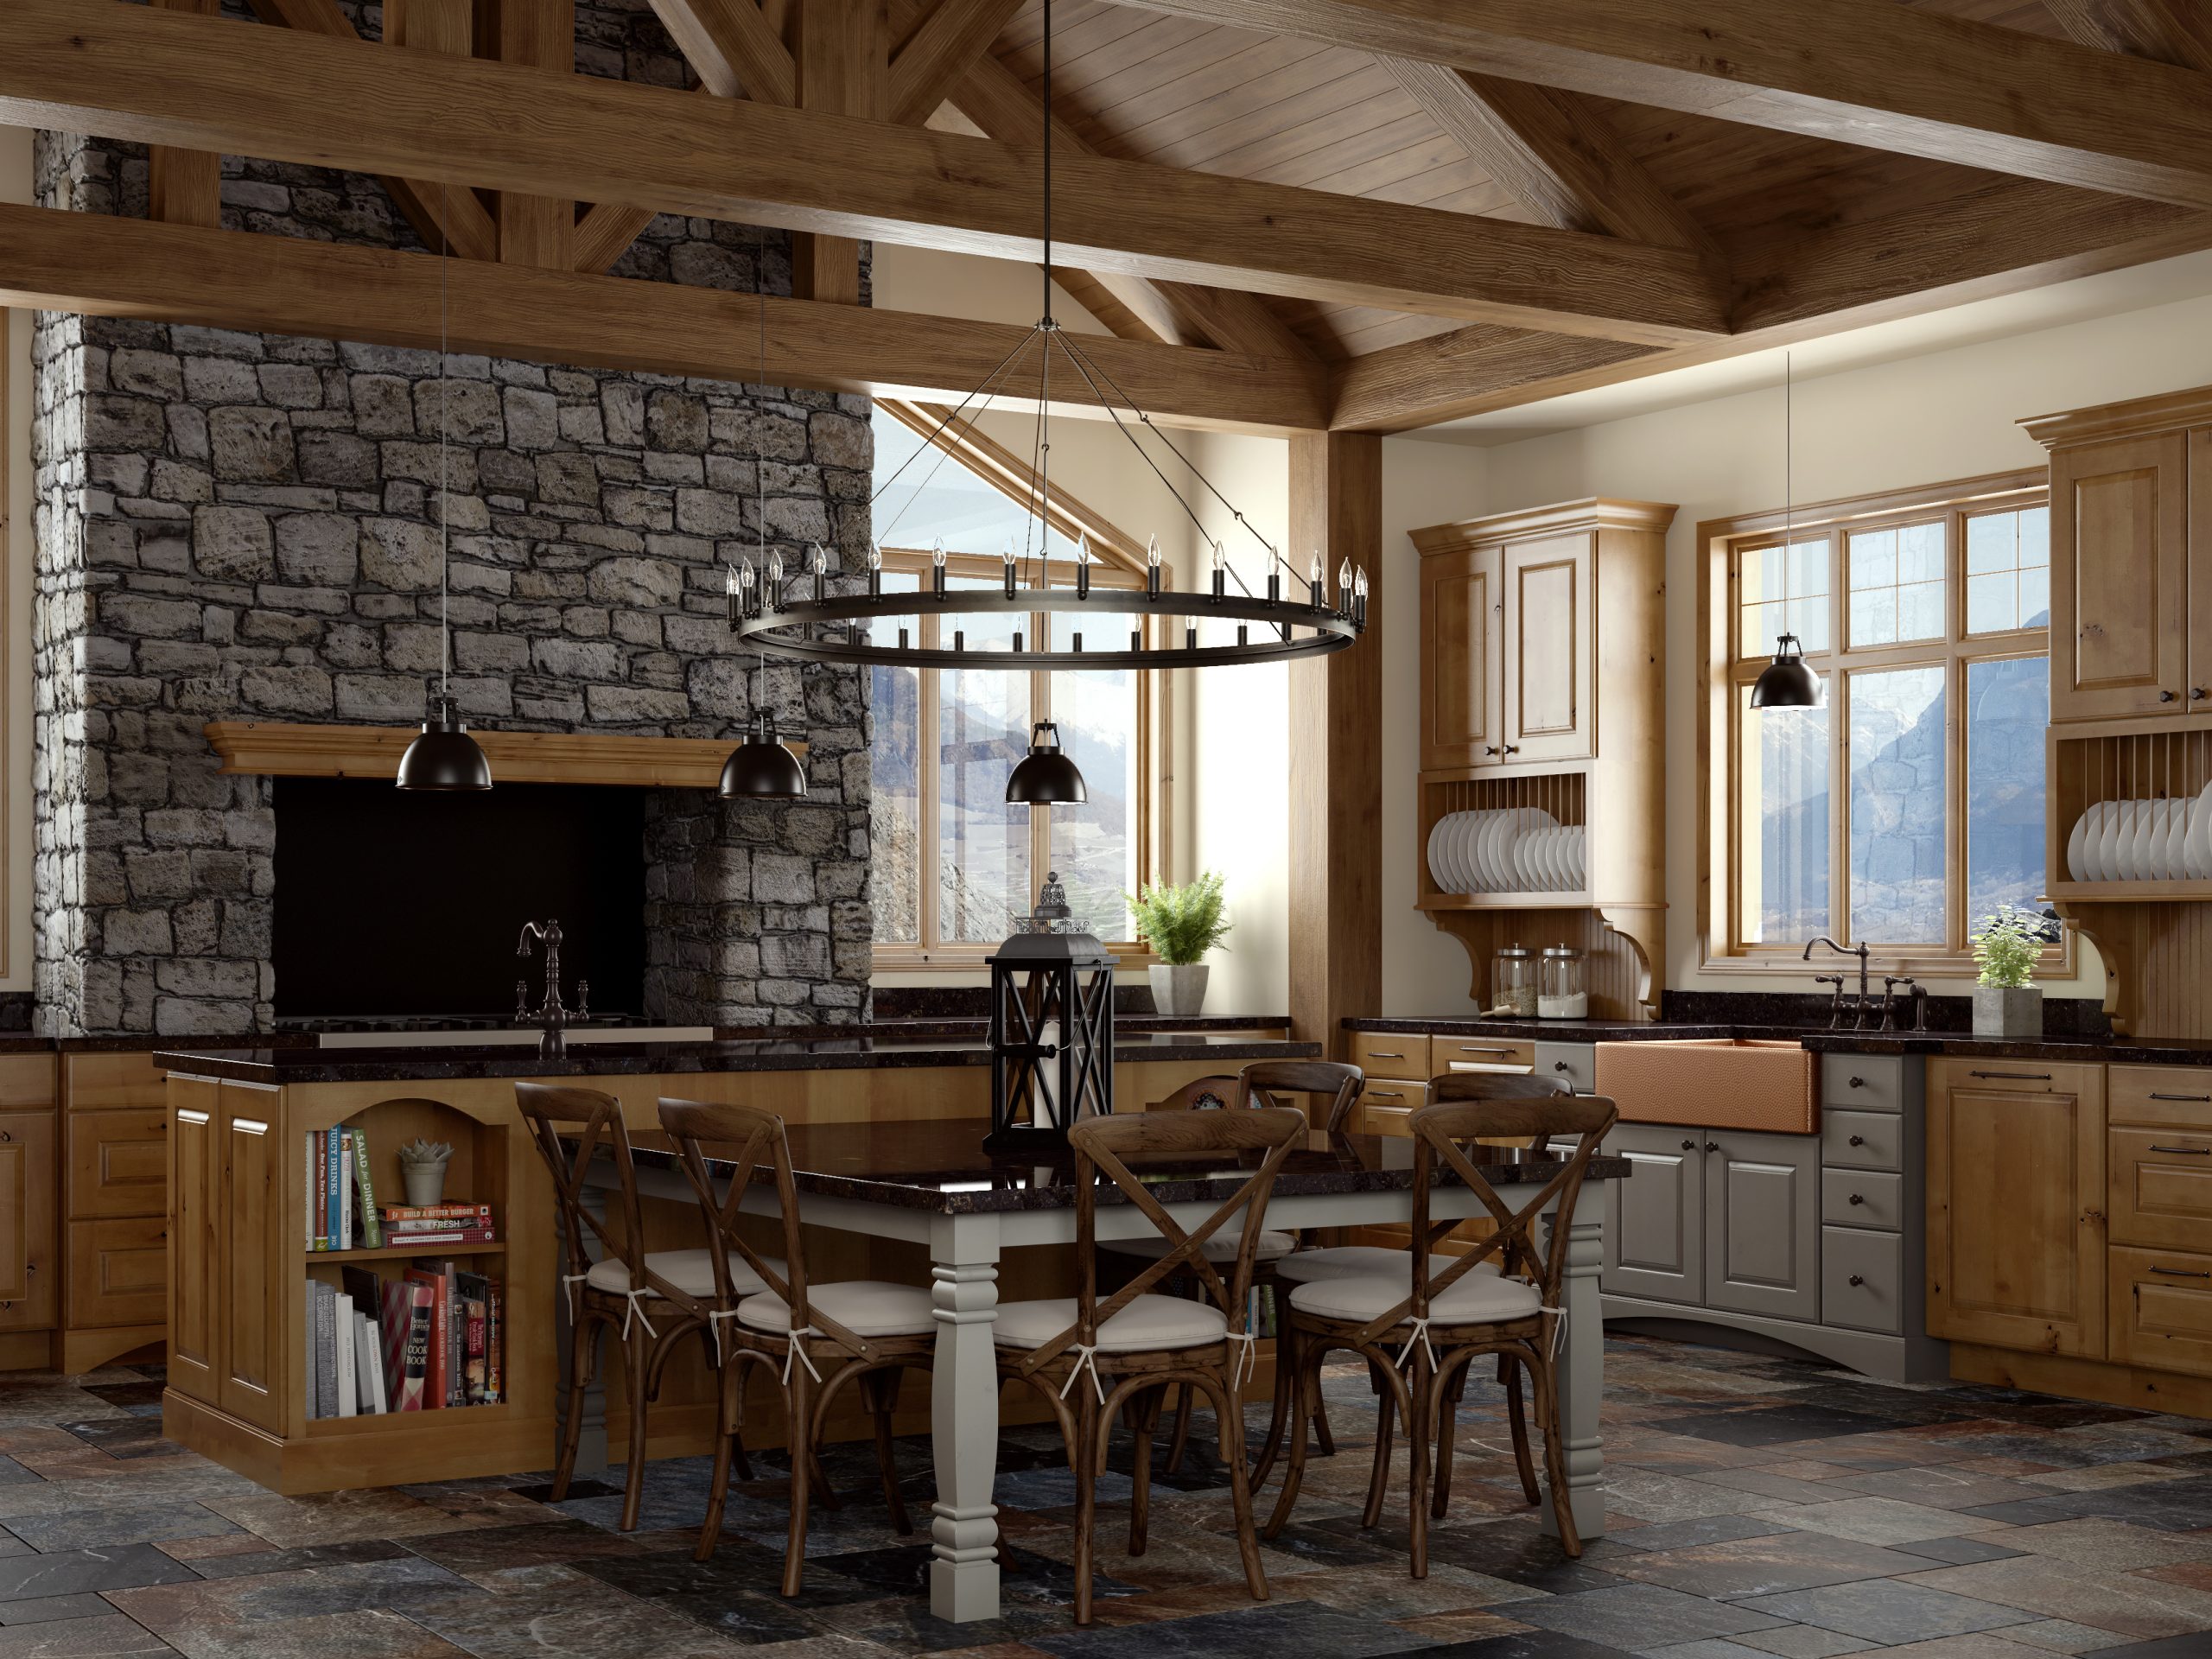 Woodland Cabinetry